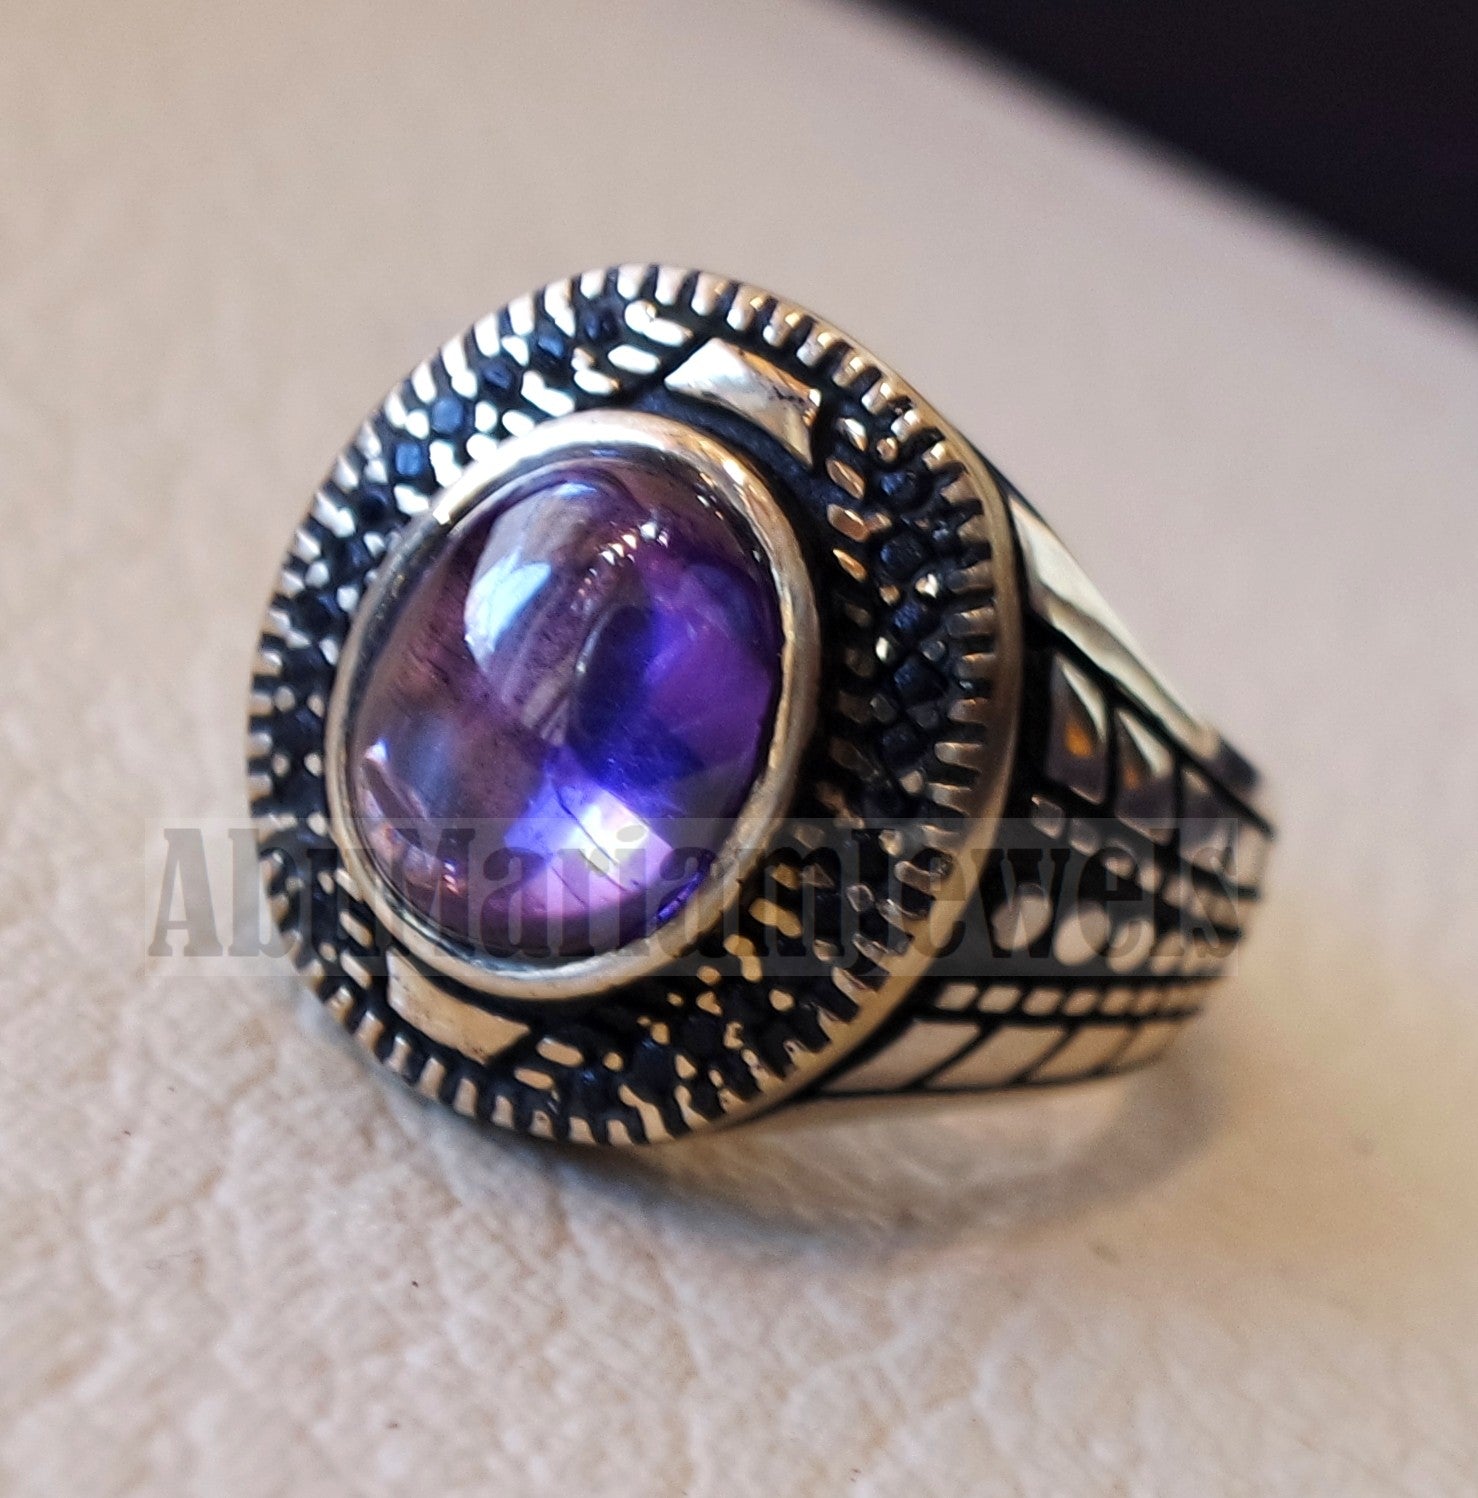 Oval purple tanzanite amethyst color synthetic imitation stone sterling silver 925 bronze stunning ring all sizes middle eastern jewelry black CZ